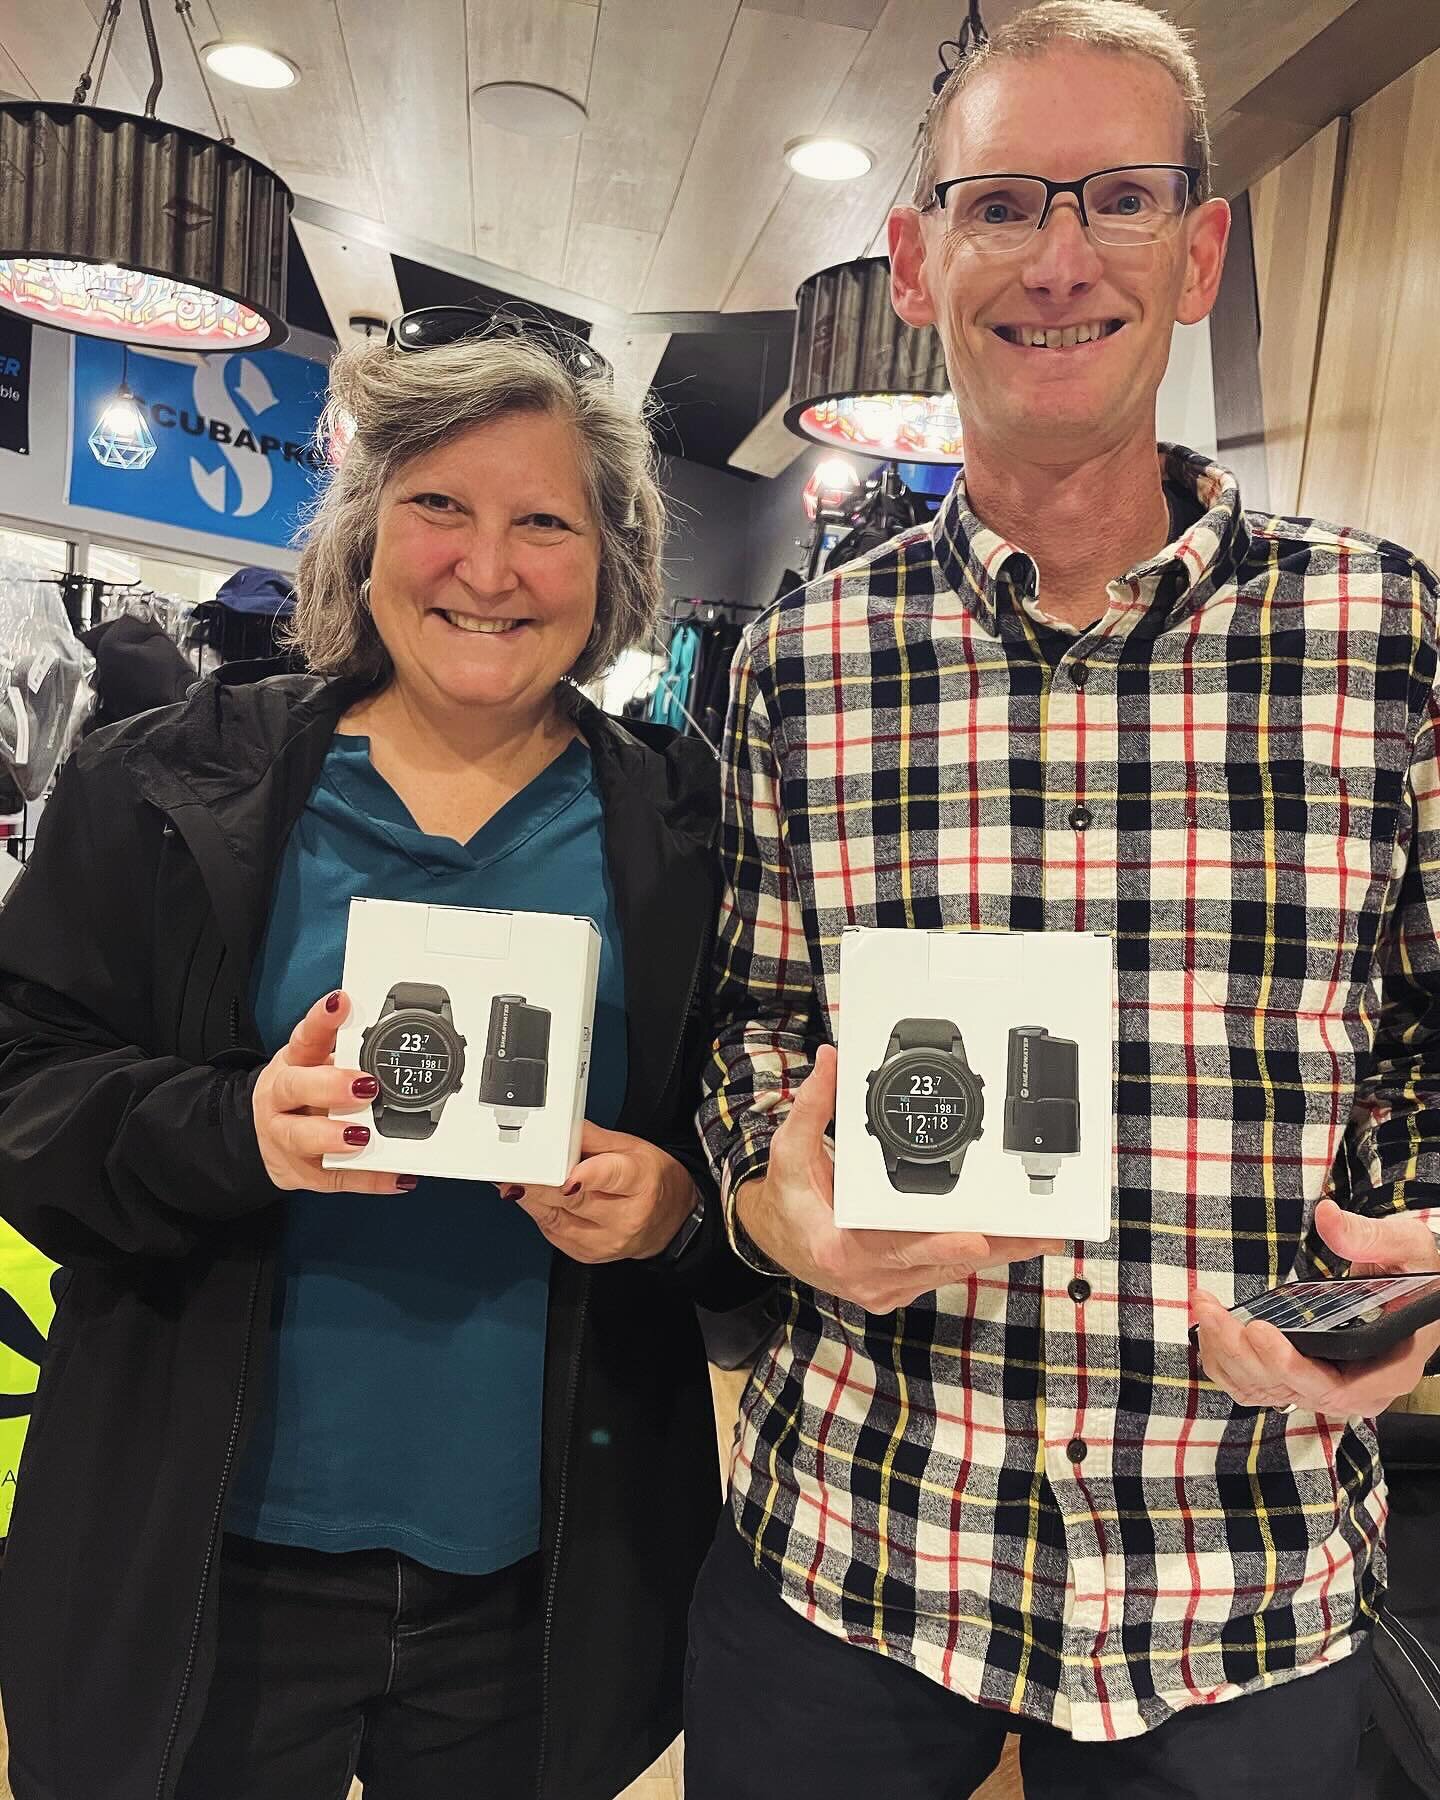 Congrats to two new owners of the Shearwater Tern TX! Get geared up for your next dive - stop by @scubaclt today!

#scubadiving #shearwater #terntxshearwater #divecomputer #scubaclub #adventure #newgear #scubashackusa #scubaclt